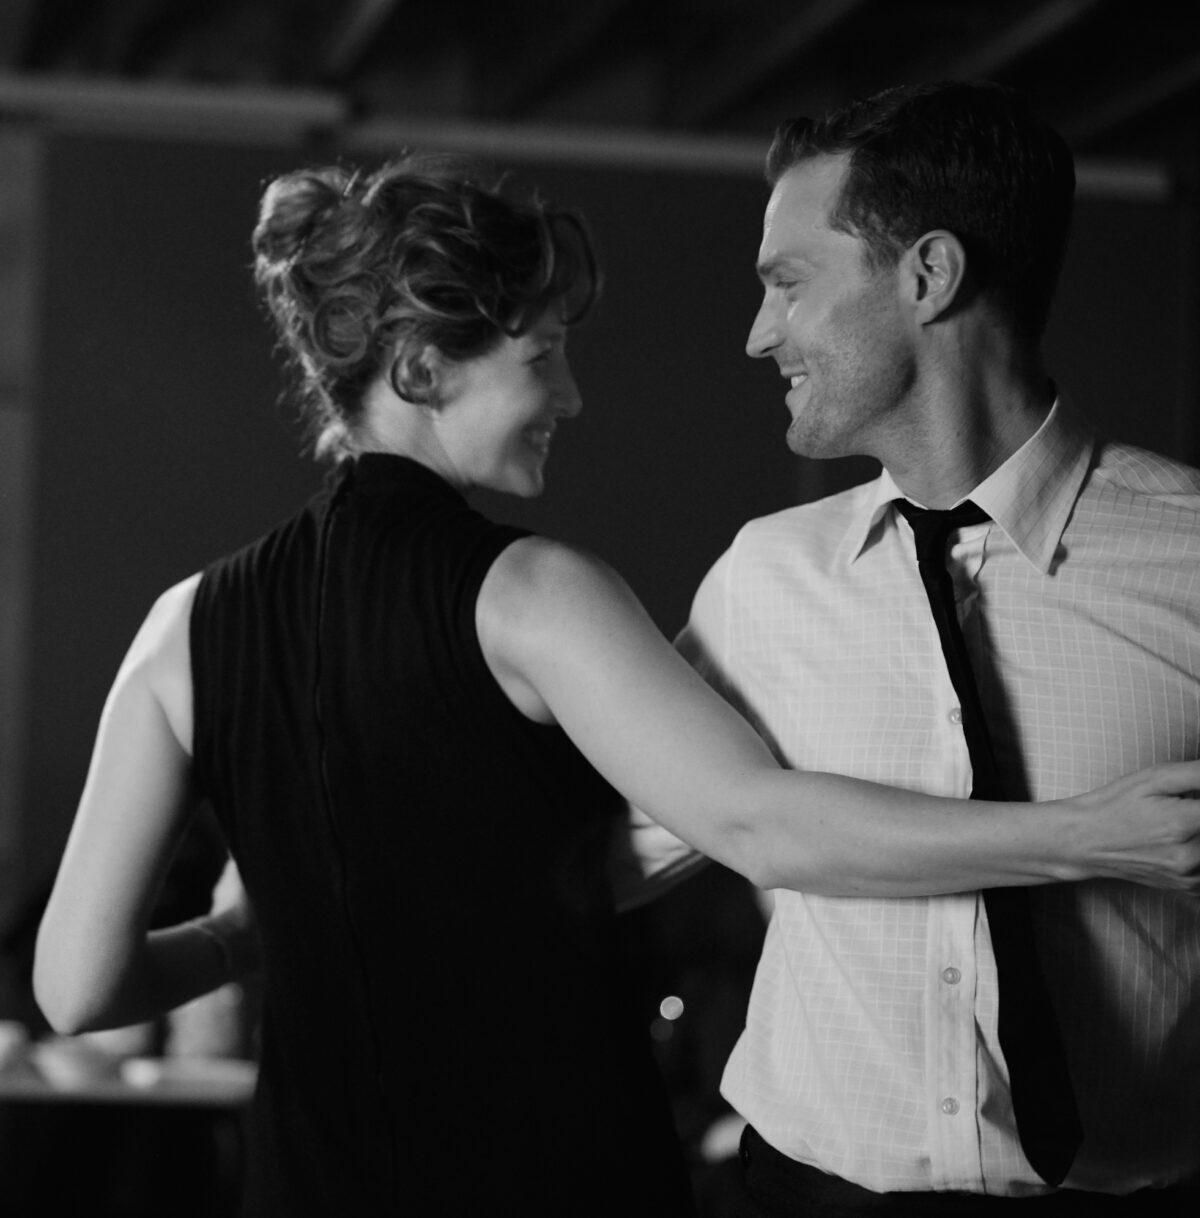 Ma (Catriona Balfe) and Pa (Jamie Dornan) dance at a party, in “Belfast.” (Rob Youngson/Focus Features)